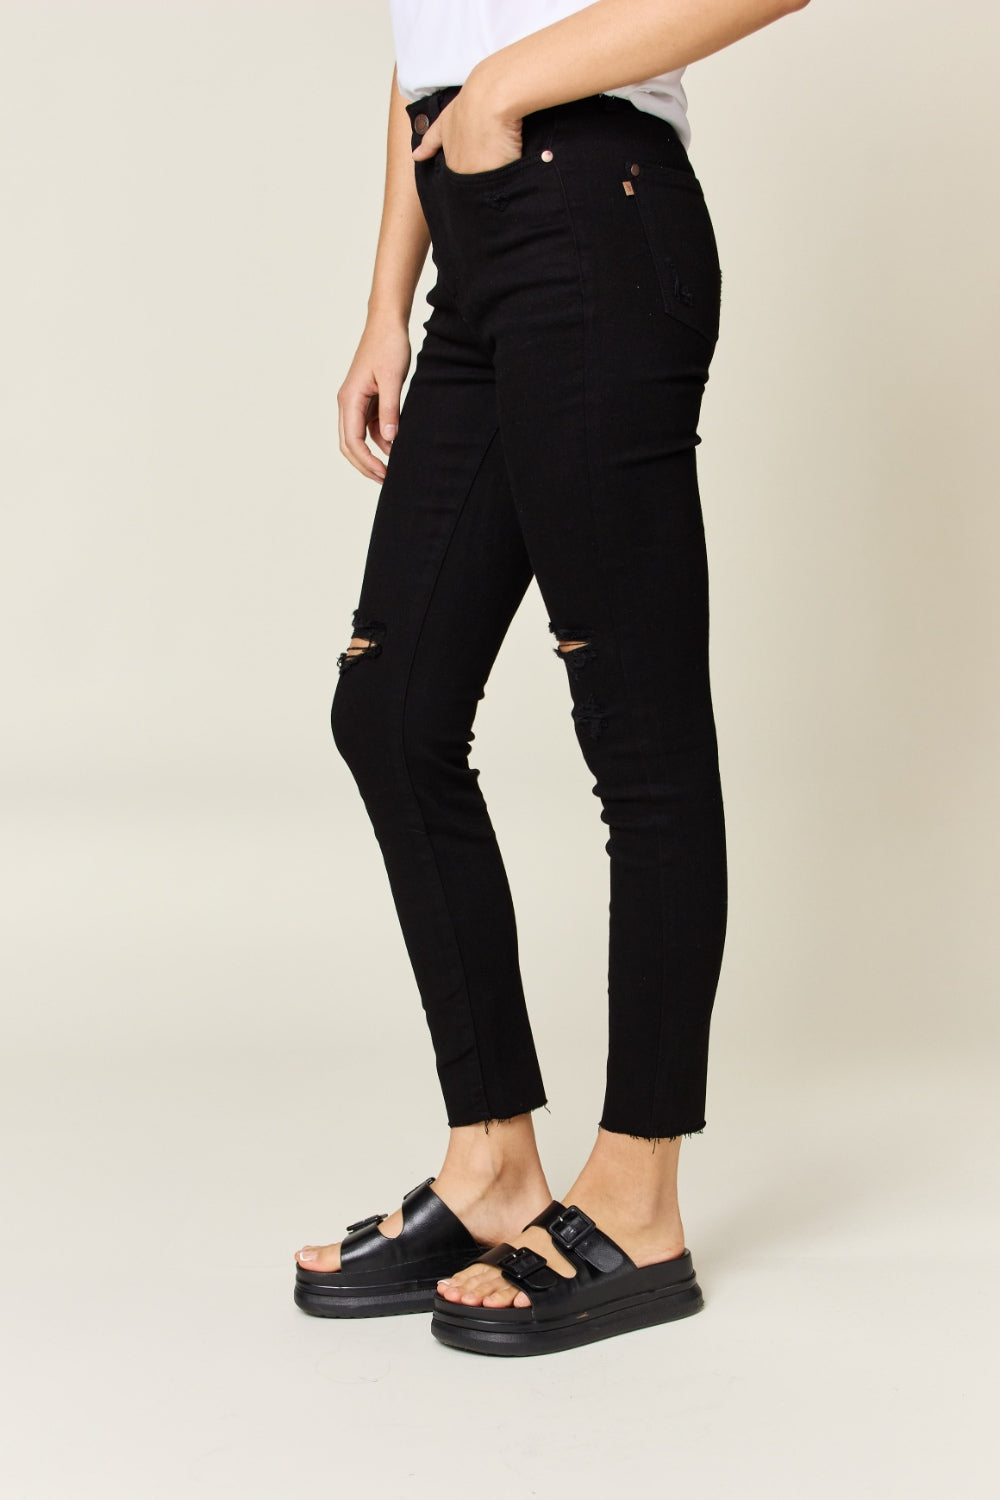 Judy Blue Distressed Tummy Control High Waist Skinny Jeans in Black  Southern Soul Collectives